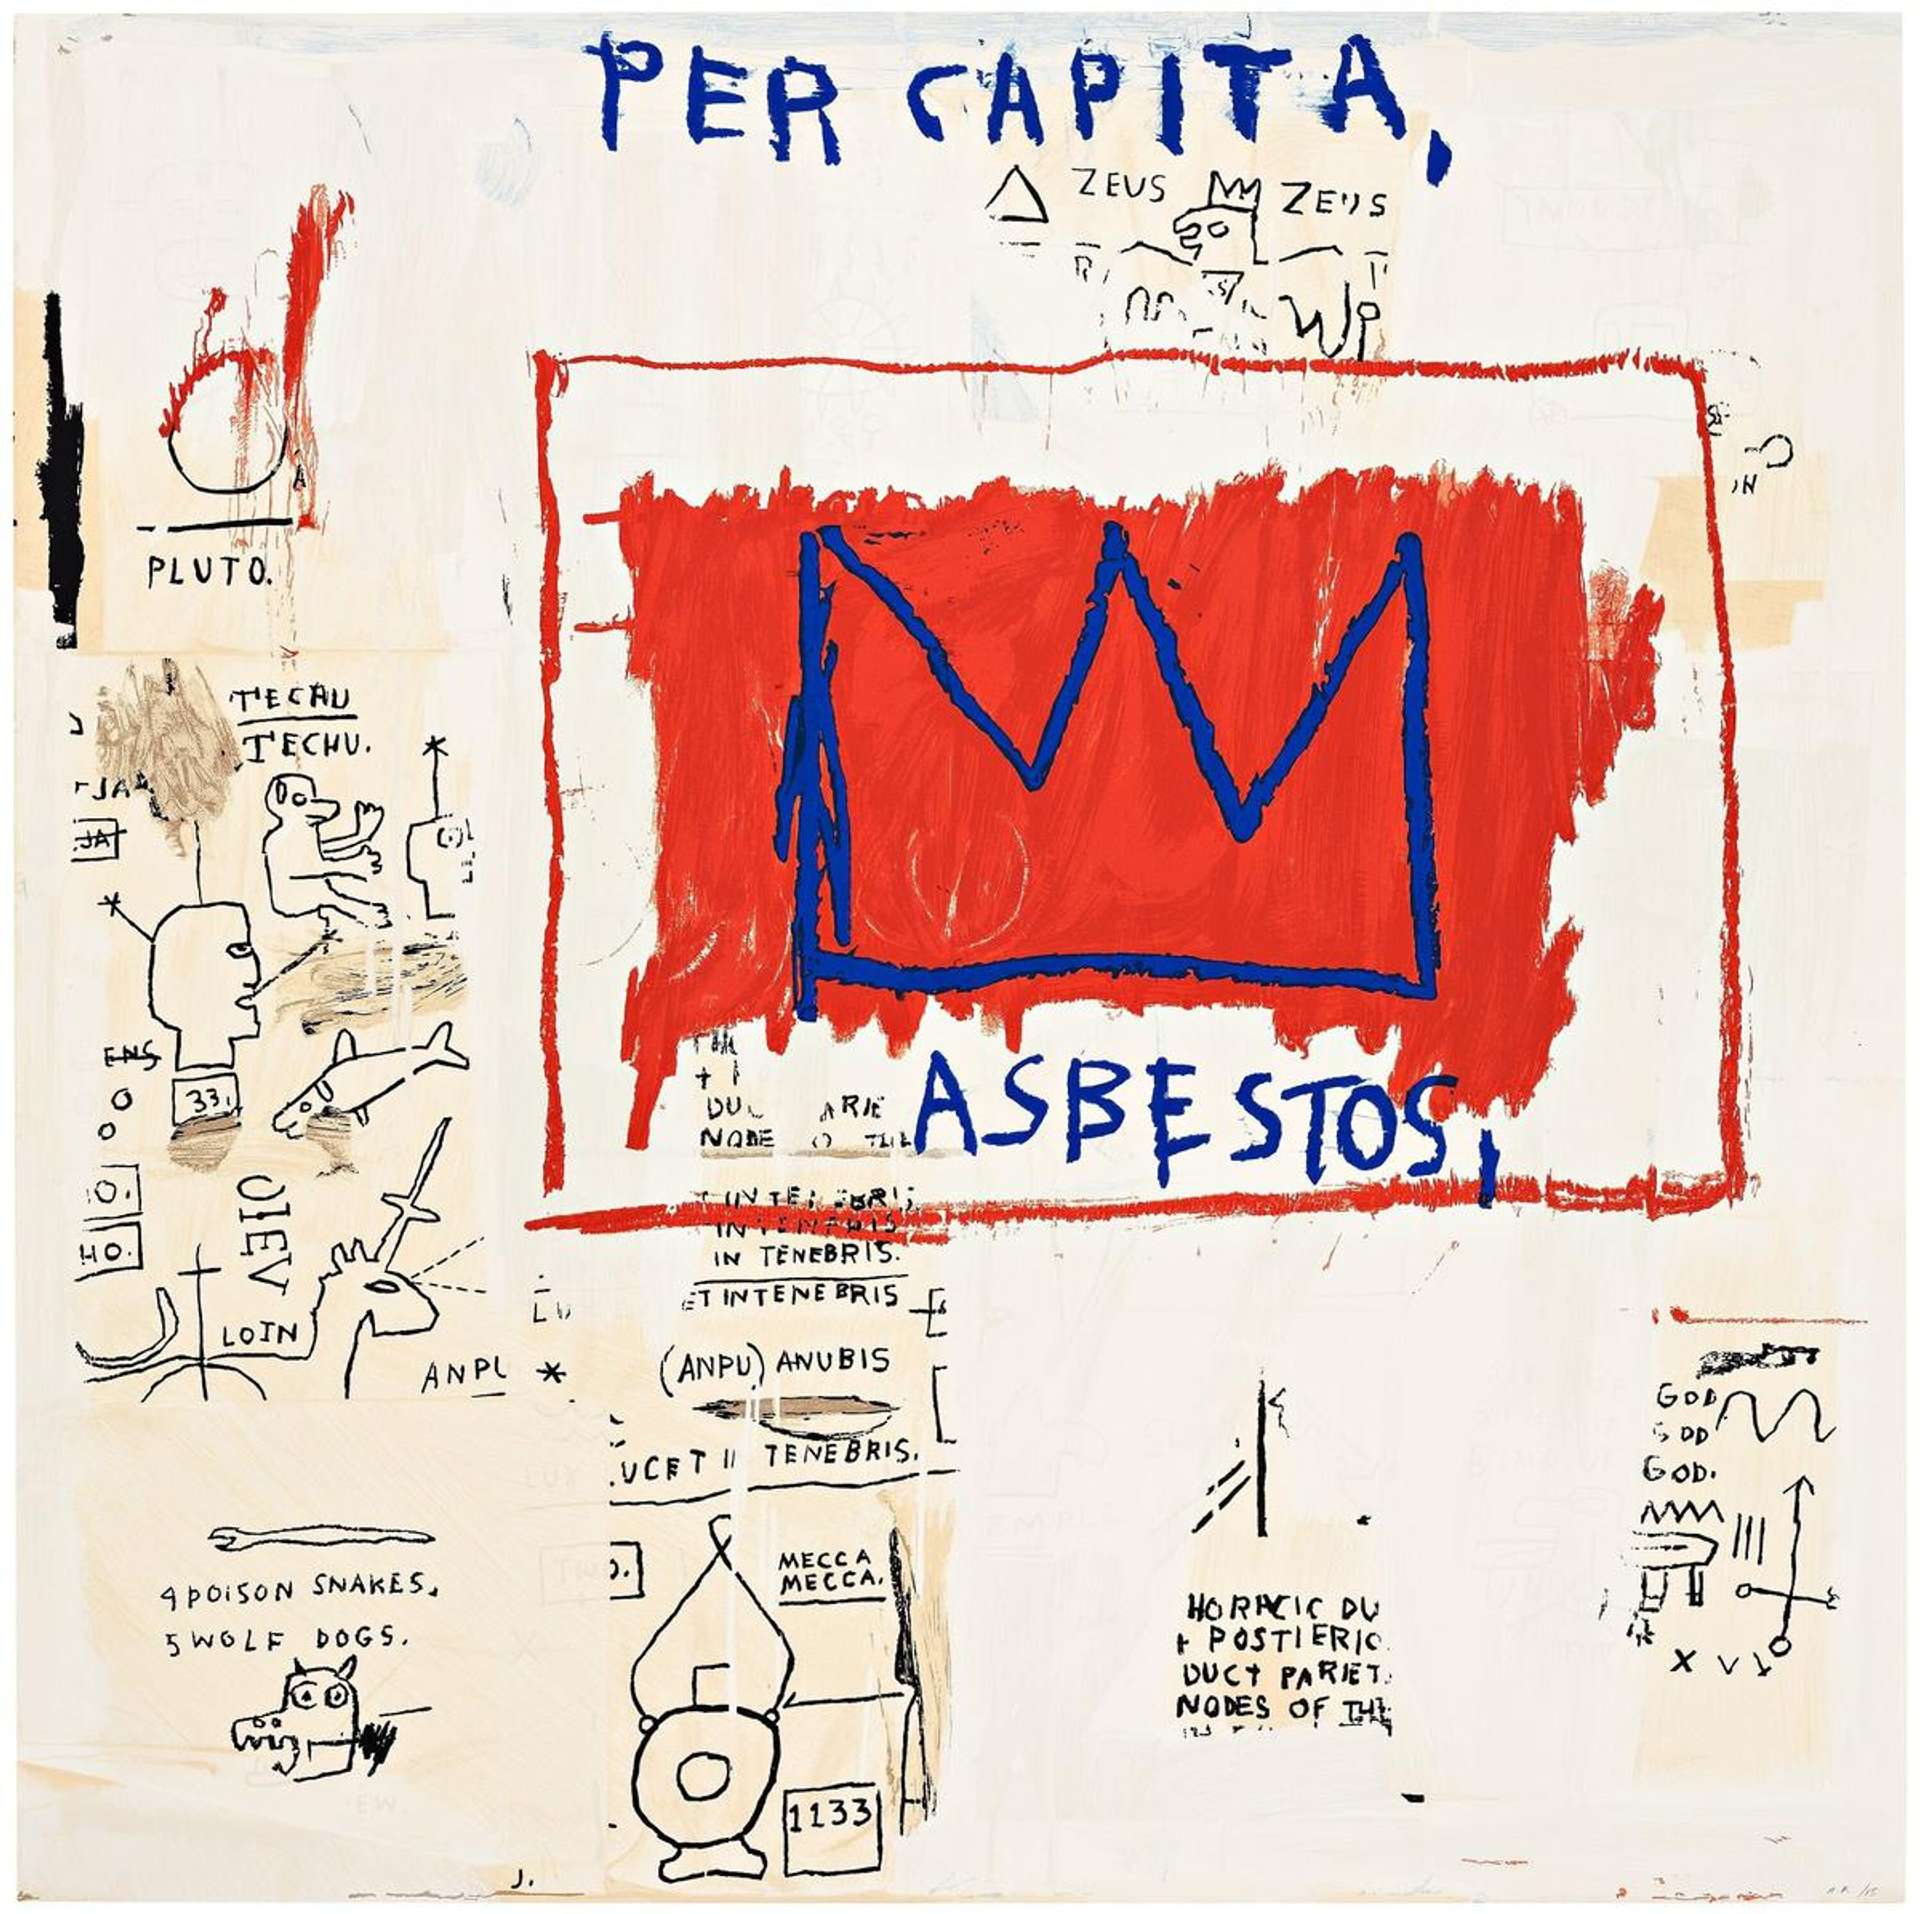 In this print, a large crown outlined in blue is painted over an amorphous area of red atop ‘ASBESTOS’ scrawled in dark blue, enclosed in a red square. Beneath this layer of shapes, text and colour, small, intricate sketches emerge from the background, some appearing like annotated  diagrams. A fish, a unicorn, a snake and a dog appear alongside text alluding to places and icons of historical and religious significance: Mecca, Anubis, God.